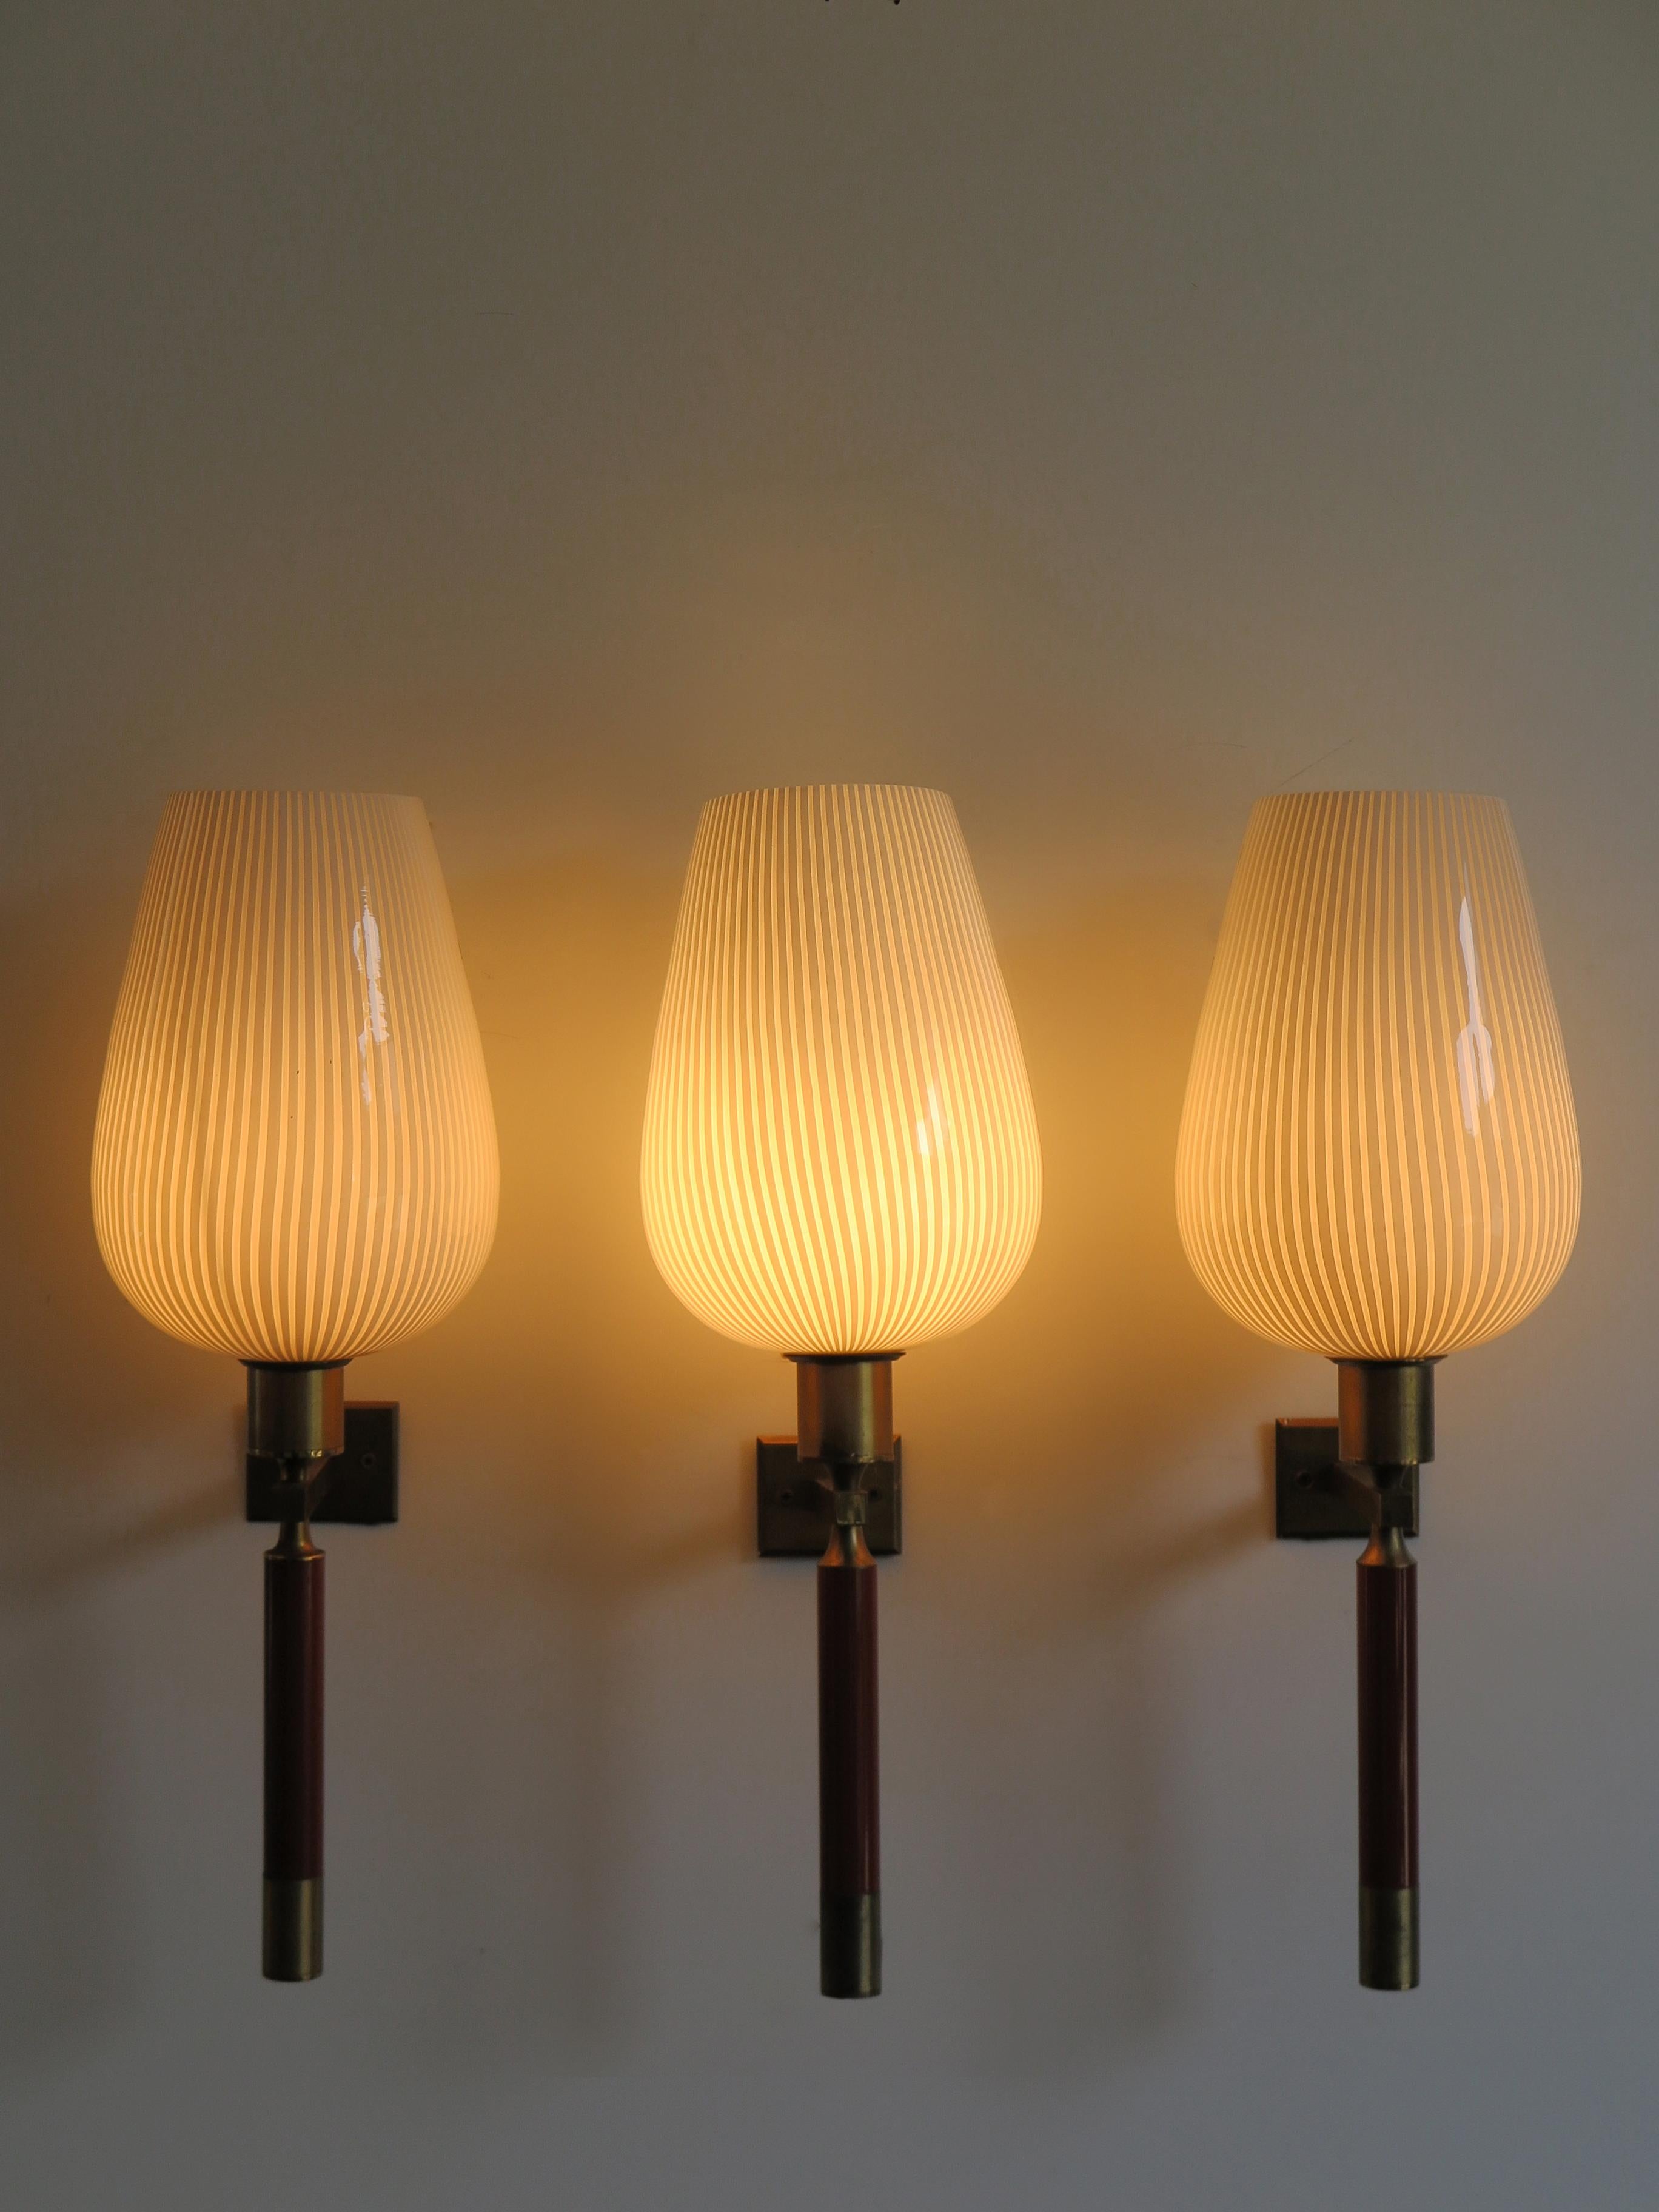 Mid-Century Modern design large Italian sconces wall lamps produced by Venini with blown glass and brass mount, Italy 1950s.
Please note that the lamps are original of the period and this shows normal signs of age and use.